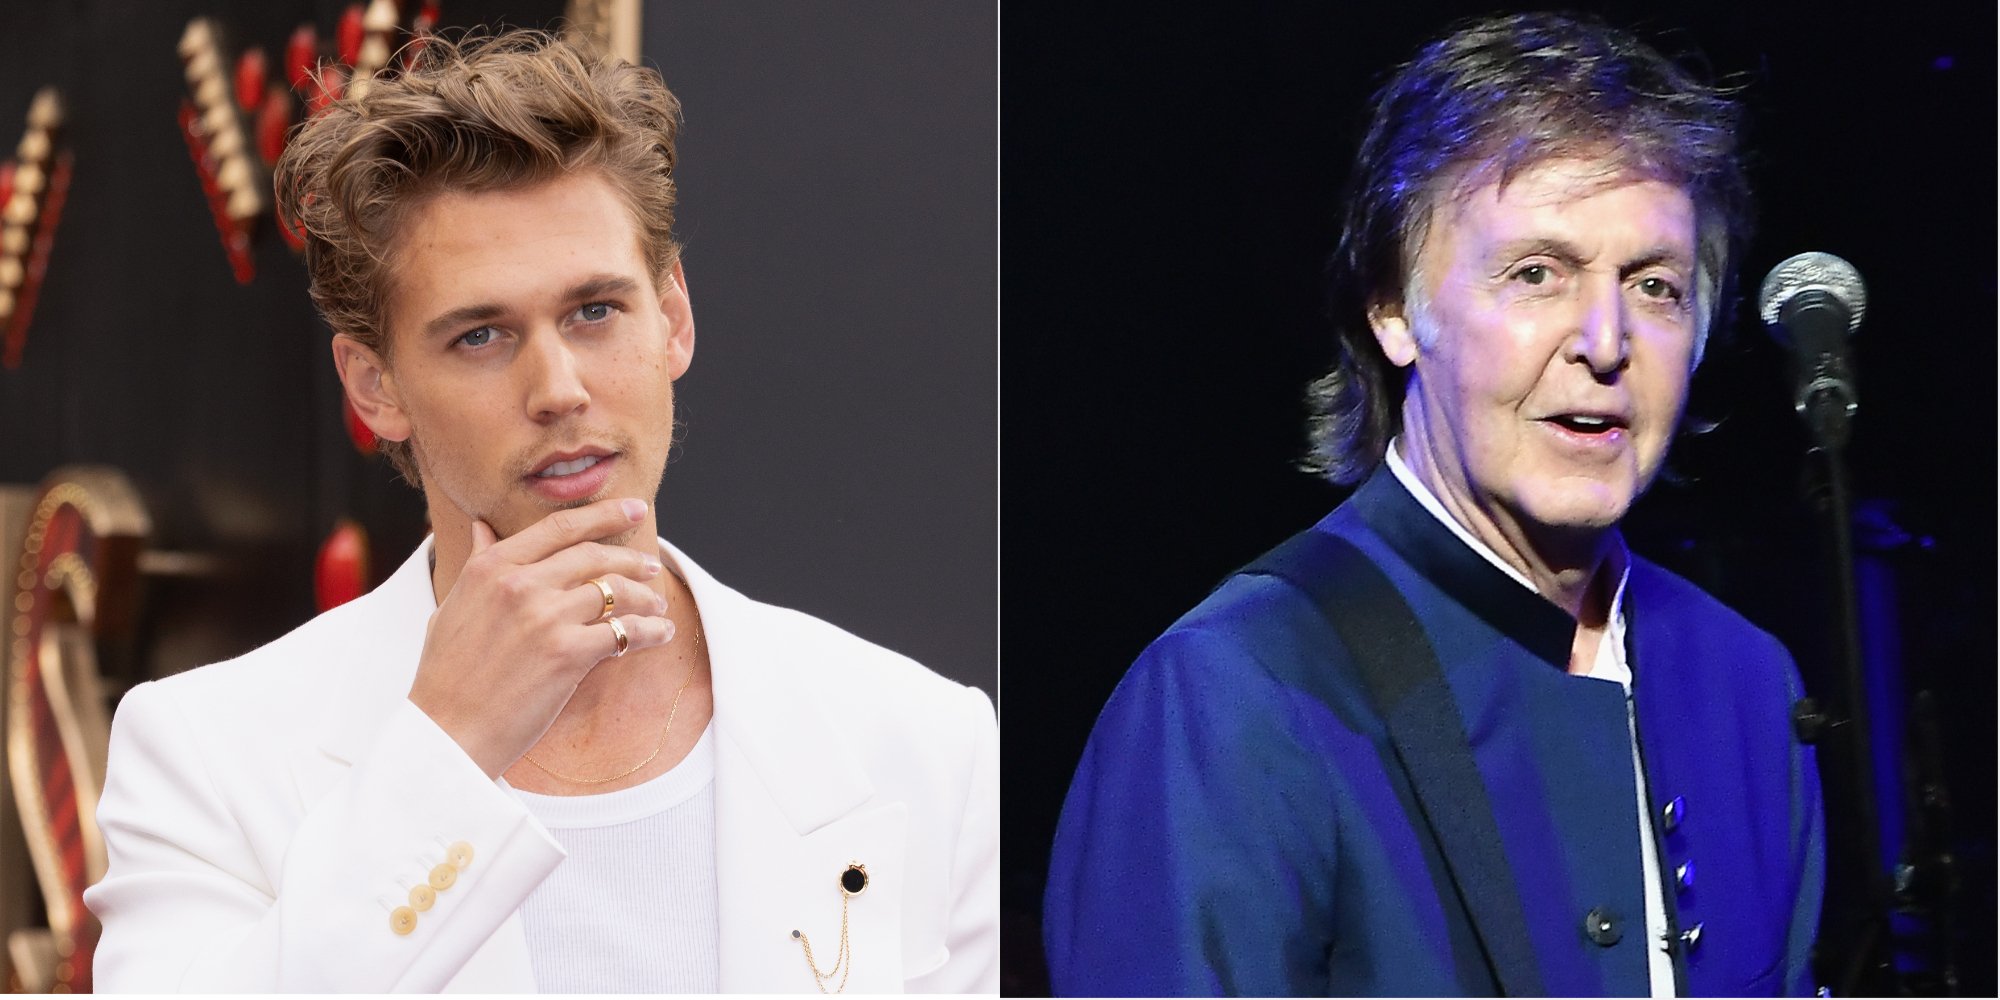 'E;vis' star Austin Butler in a side by side photo with Paul McCartney.